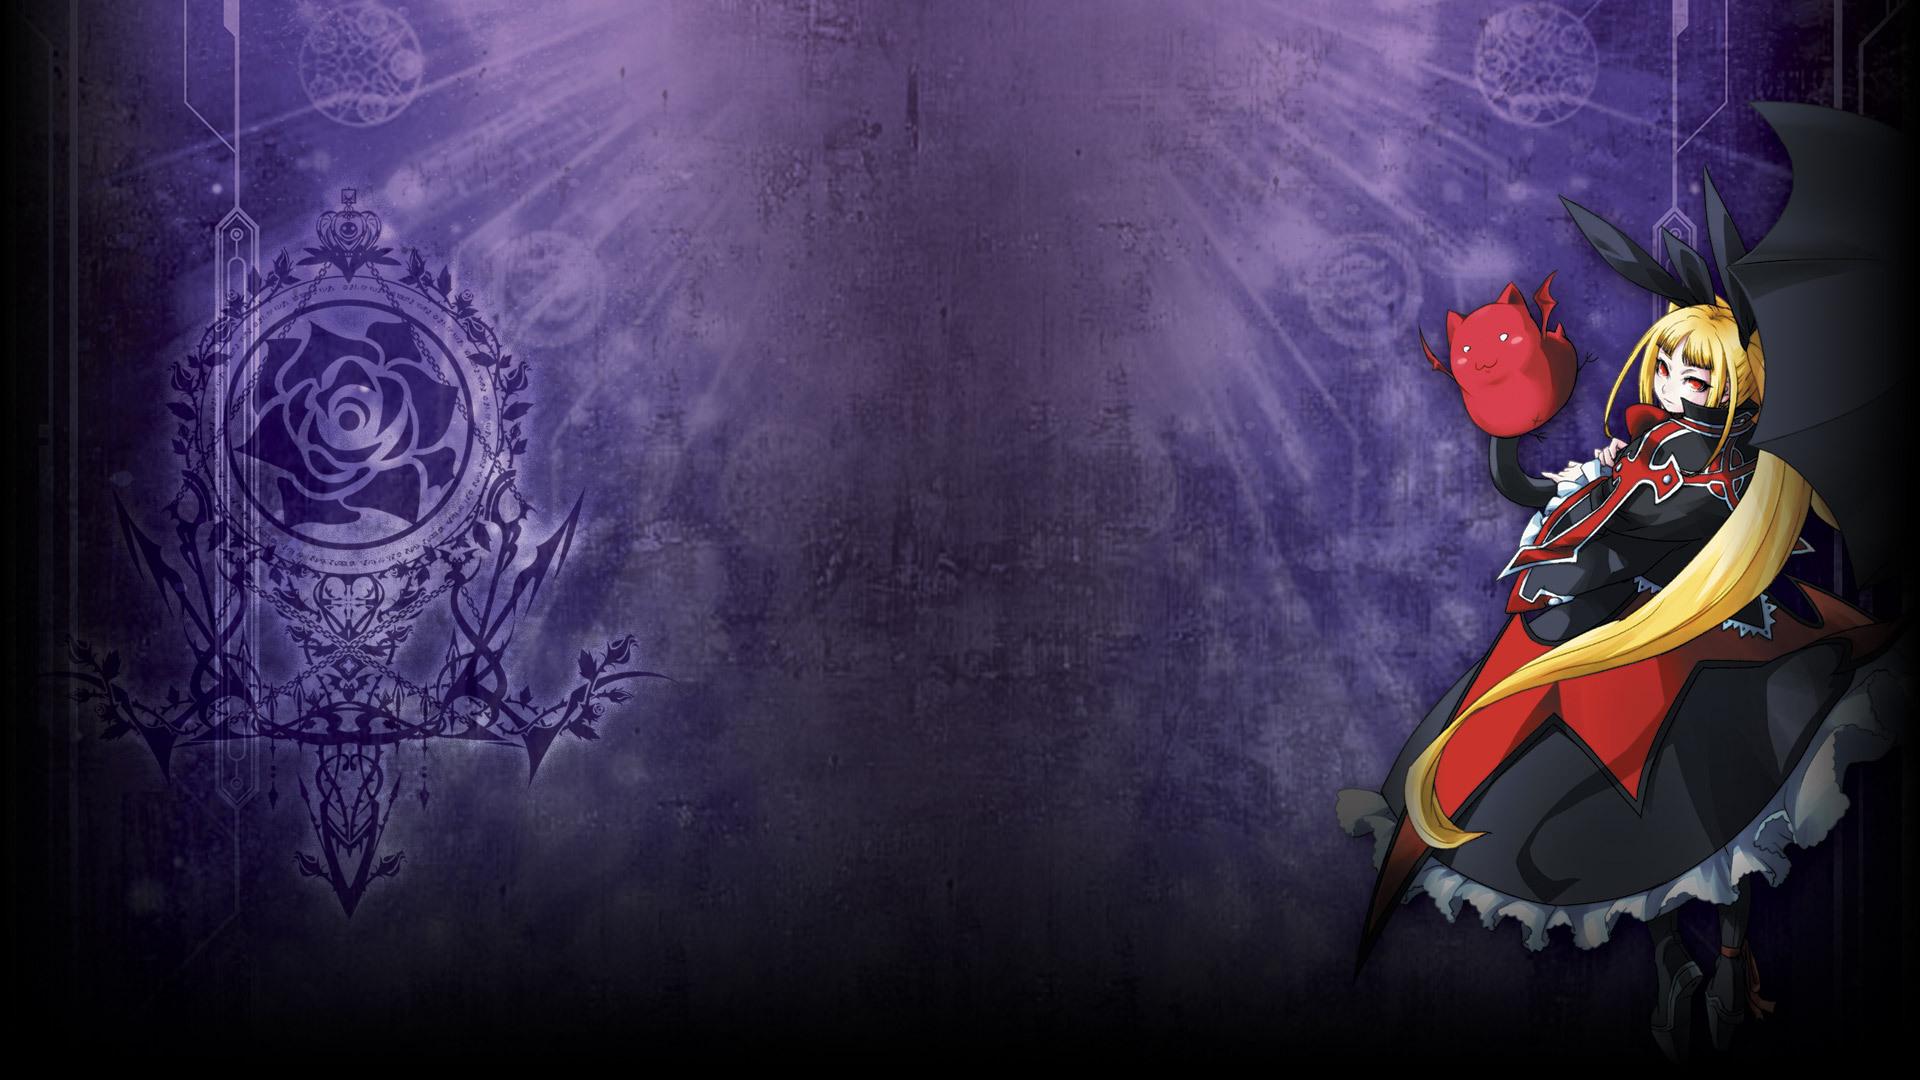 BlazBlue Continuum Shift Extend wallpapers HD quality